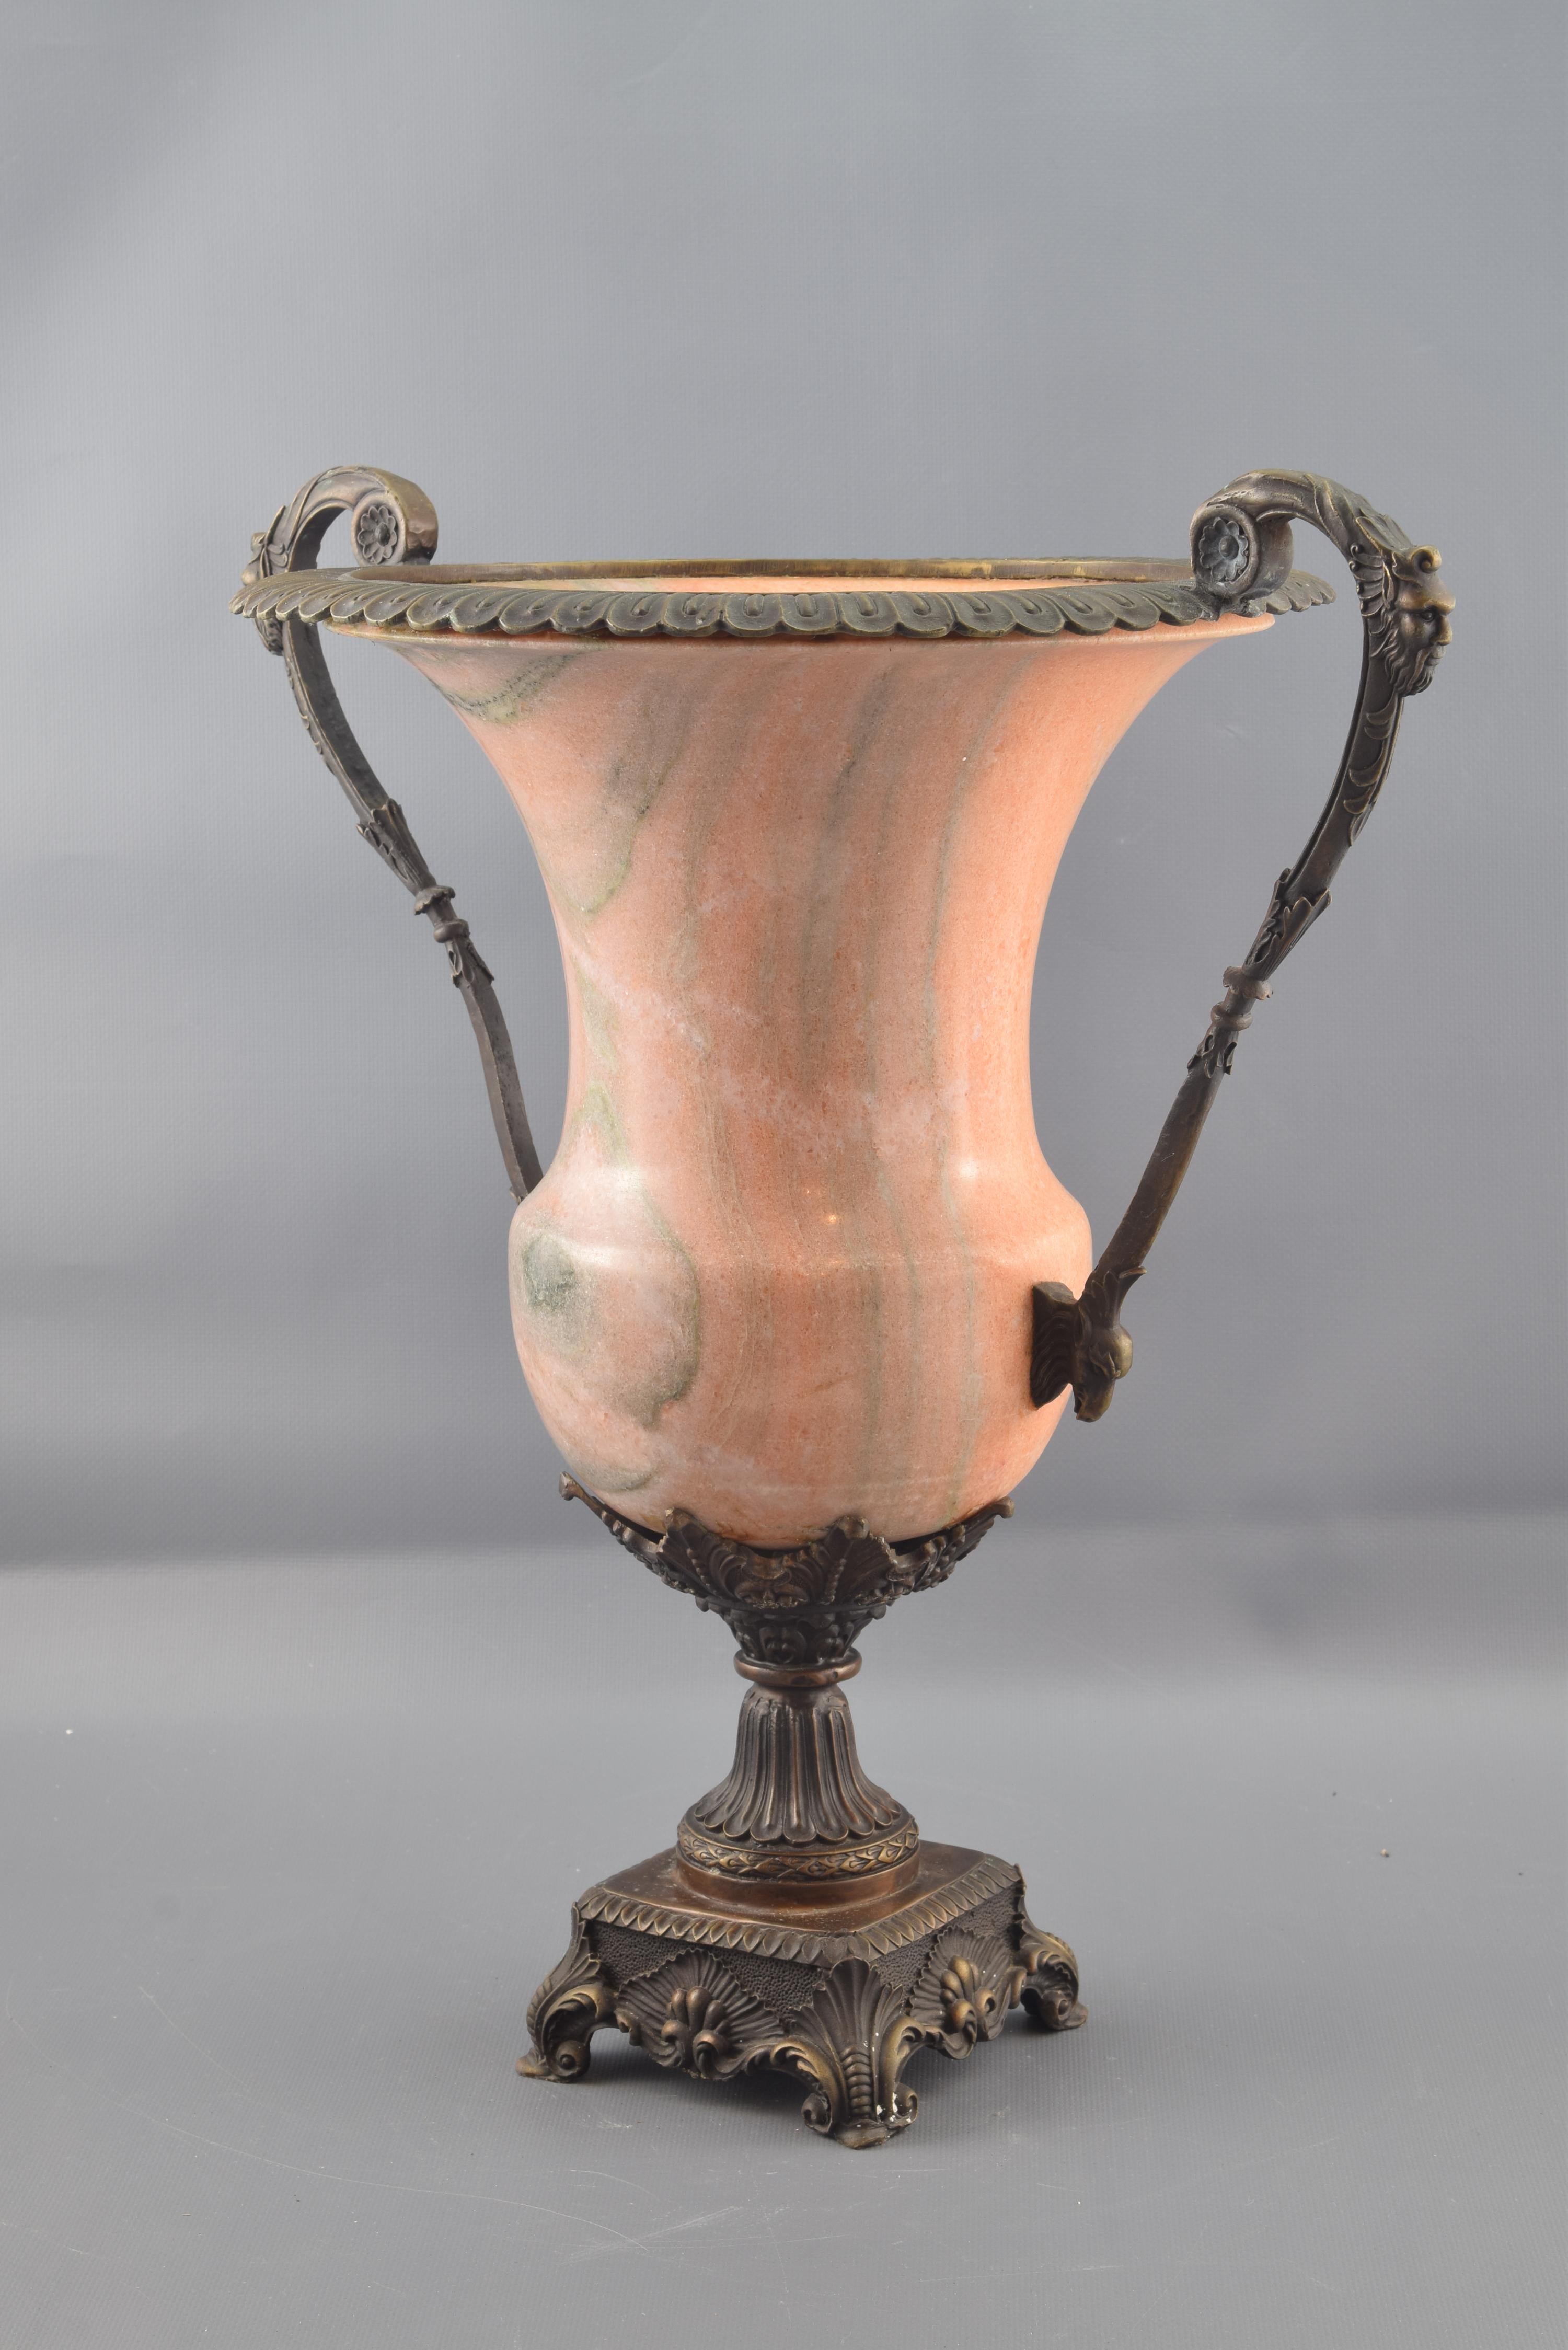 On a square base supported by scrolls and decorated with vegetal motifs, the cup is raised, formed by a foot and handles with masks and leaves in bronze and a container in pink tone alabaster. The classical inspiration of the work is clear both by